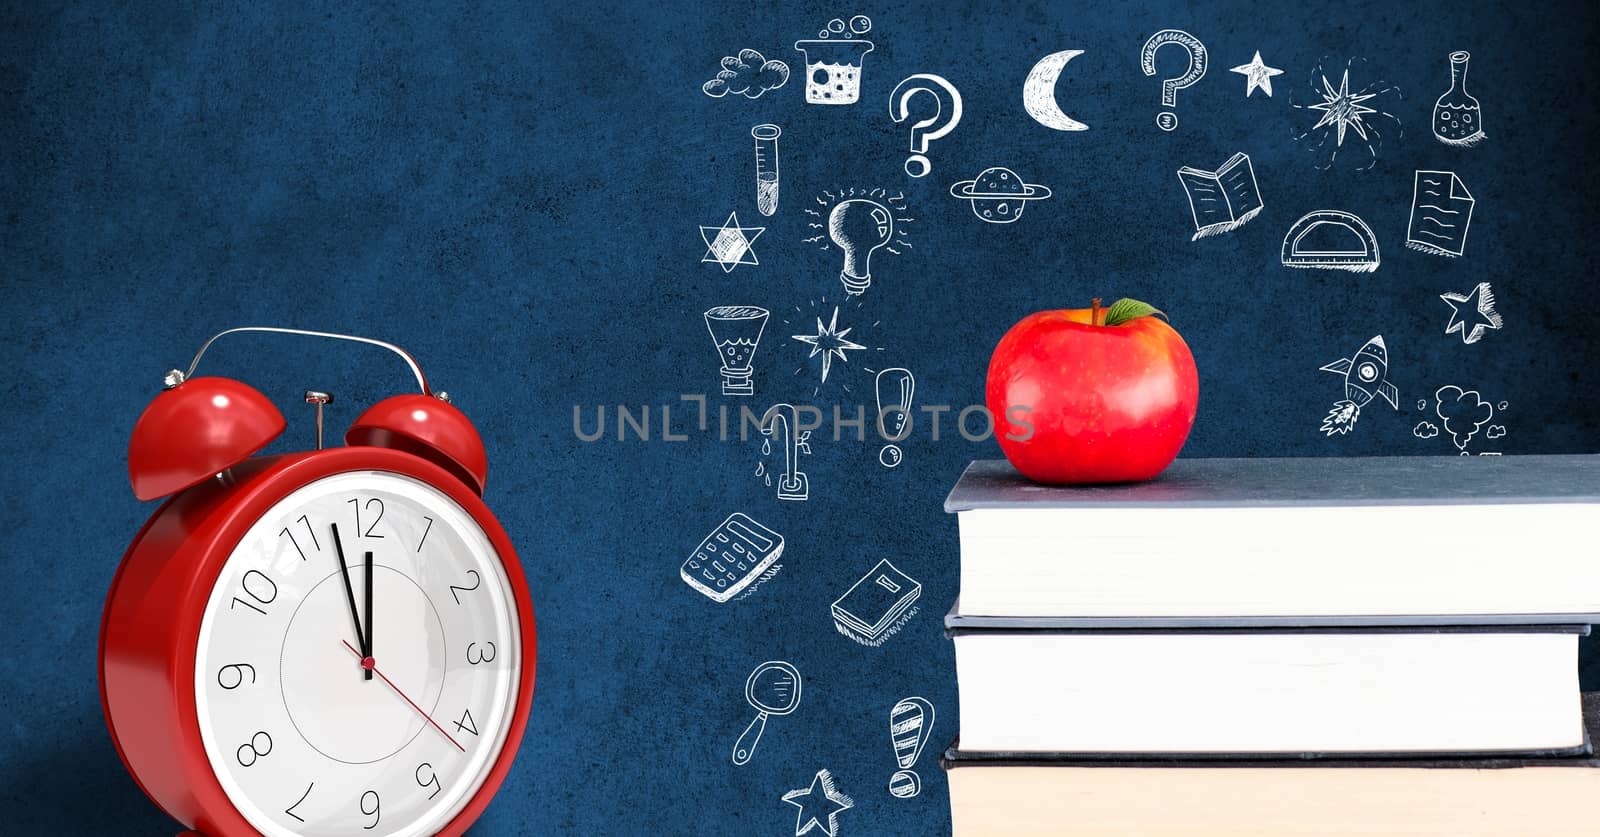 Education drawing on blackboard for school with books and apple by Wavebreakmedia